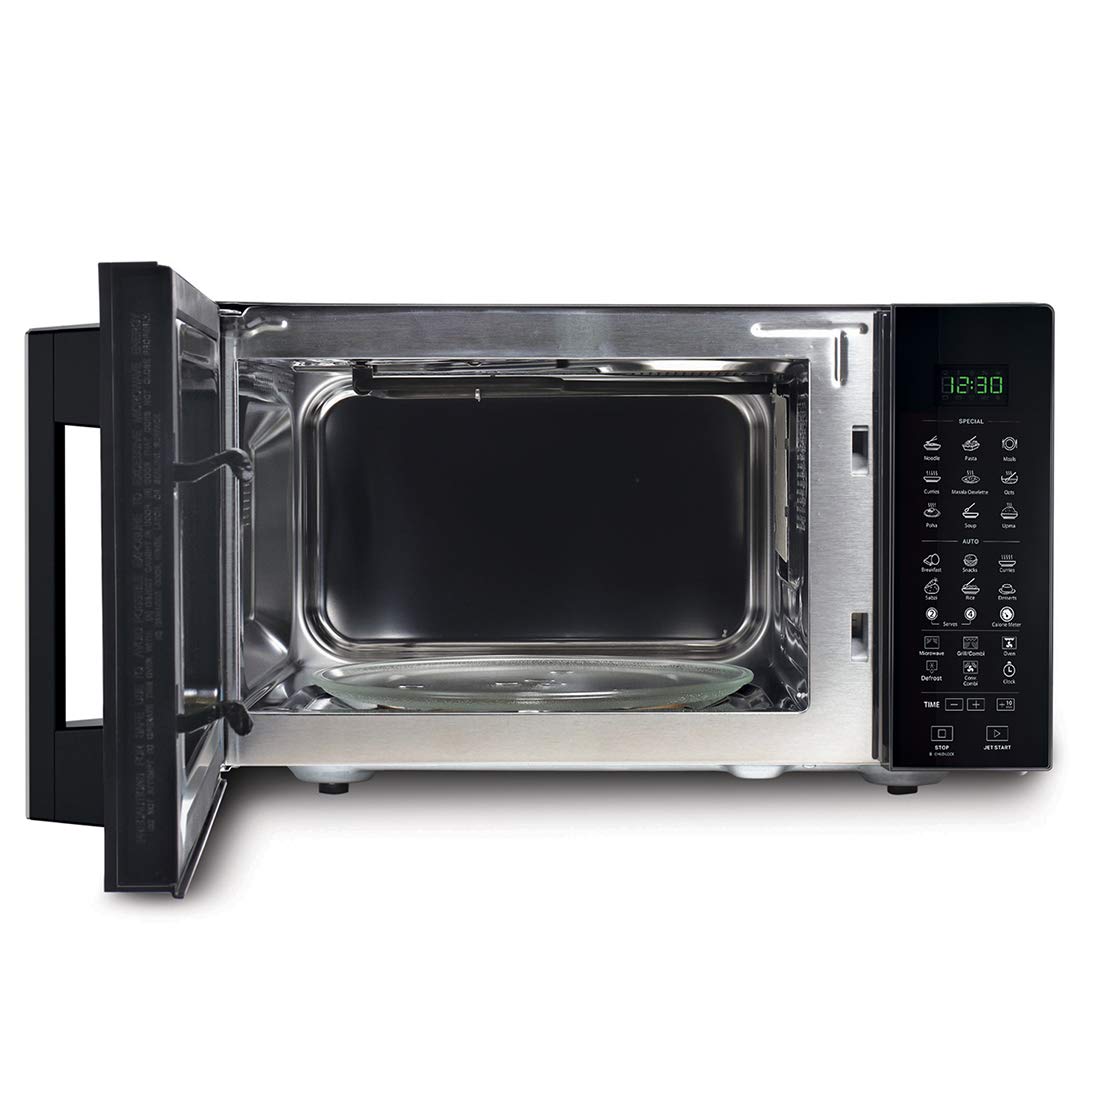 Whirlpool 24 L Convection Microwave Oven (Magicook Pro 26CE, Black)-11475